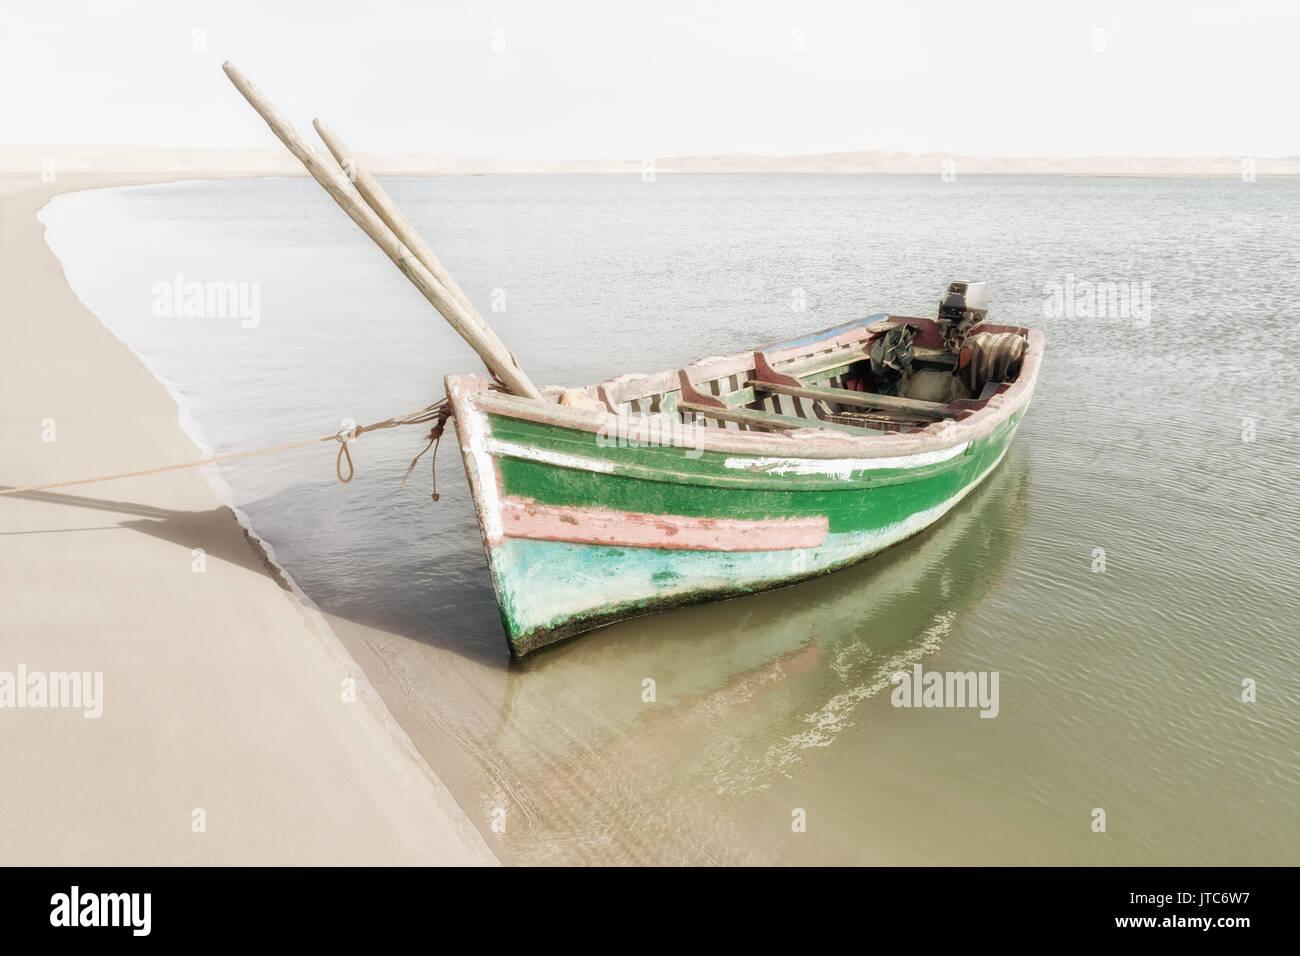 Beach with sand dunes and boat. High key, Instagram feeling image with muted colors. Stock Photo